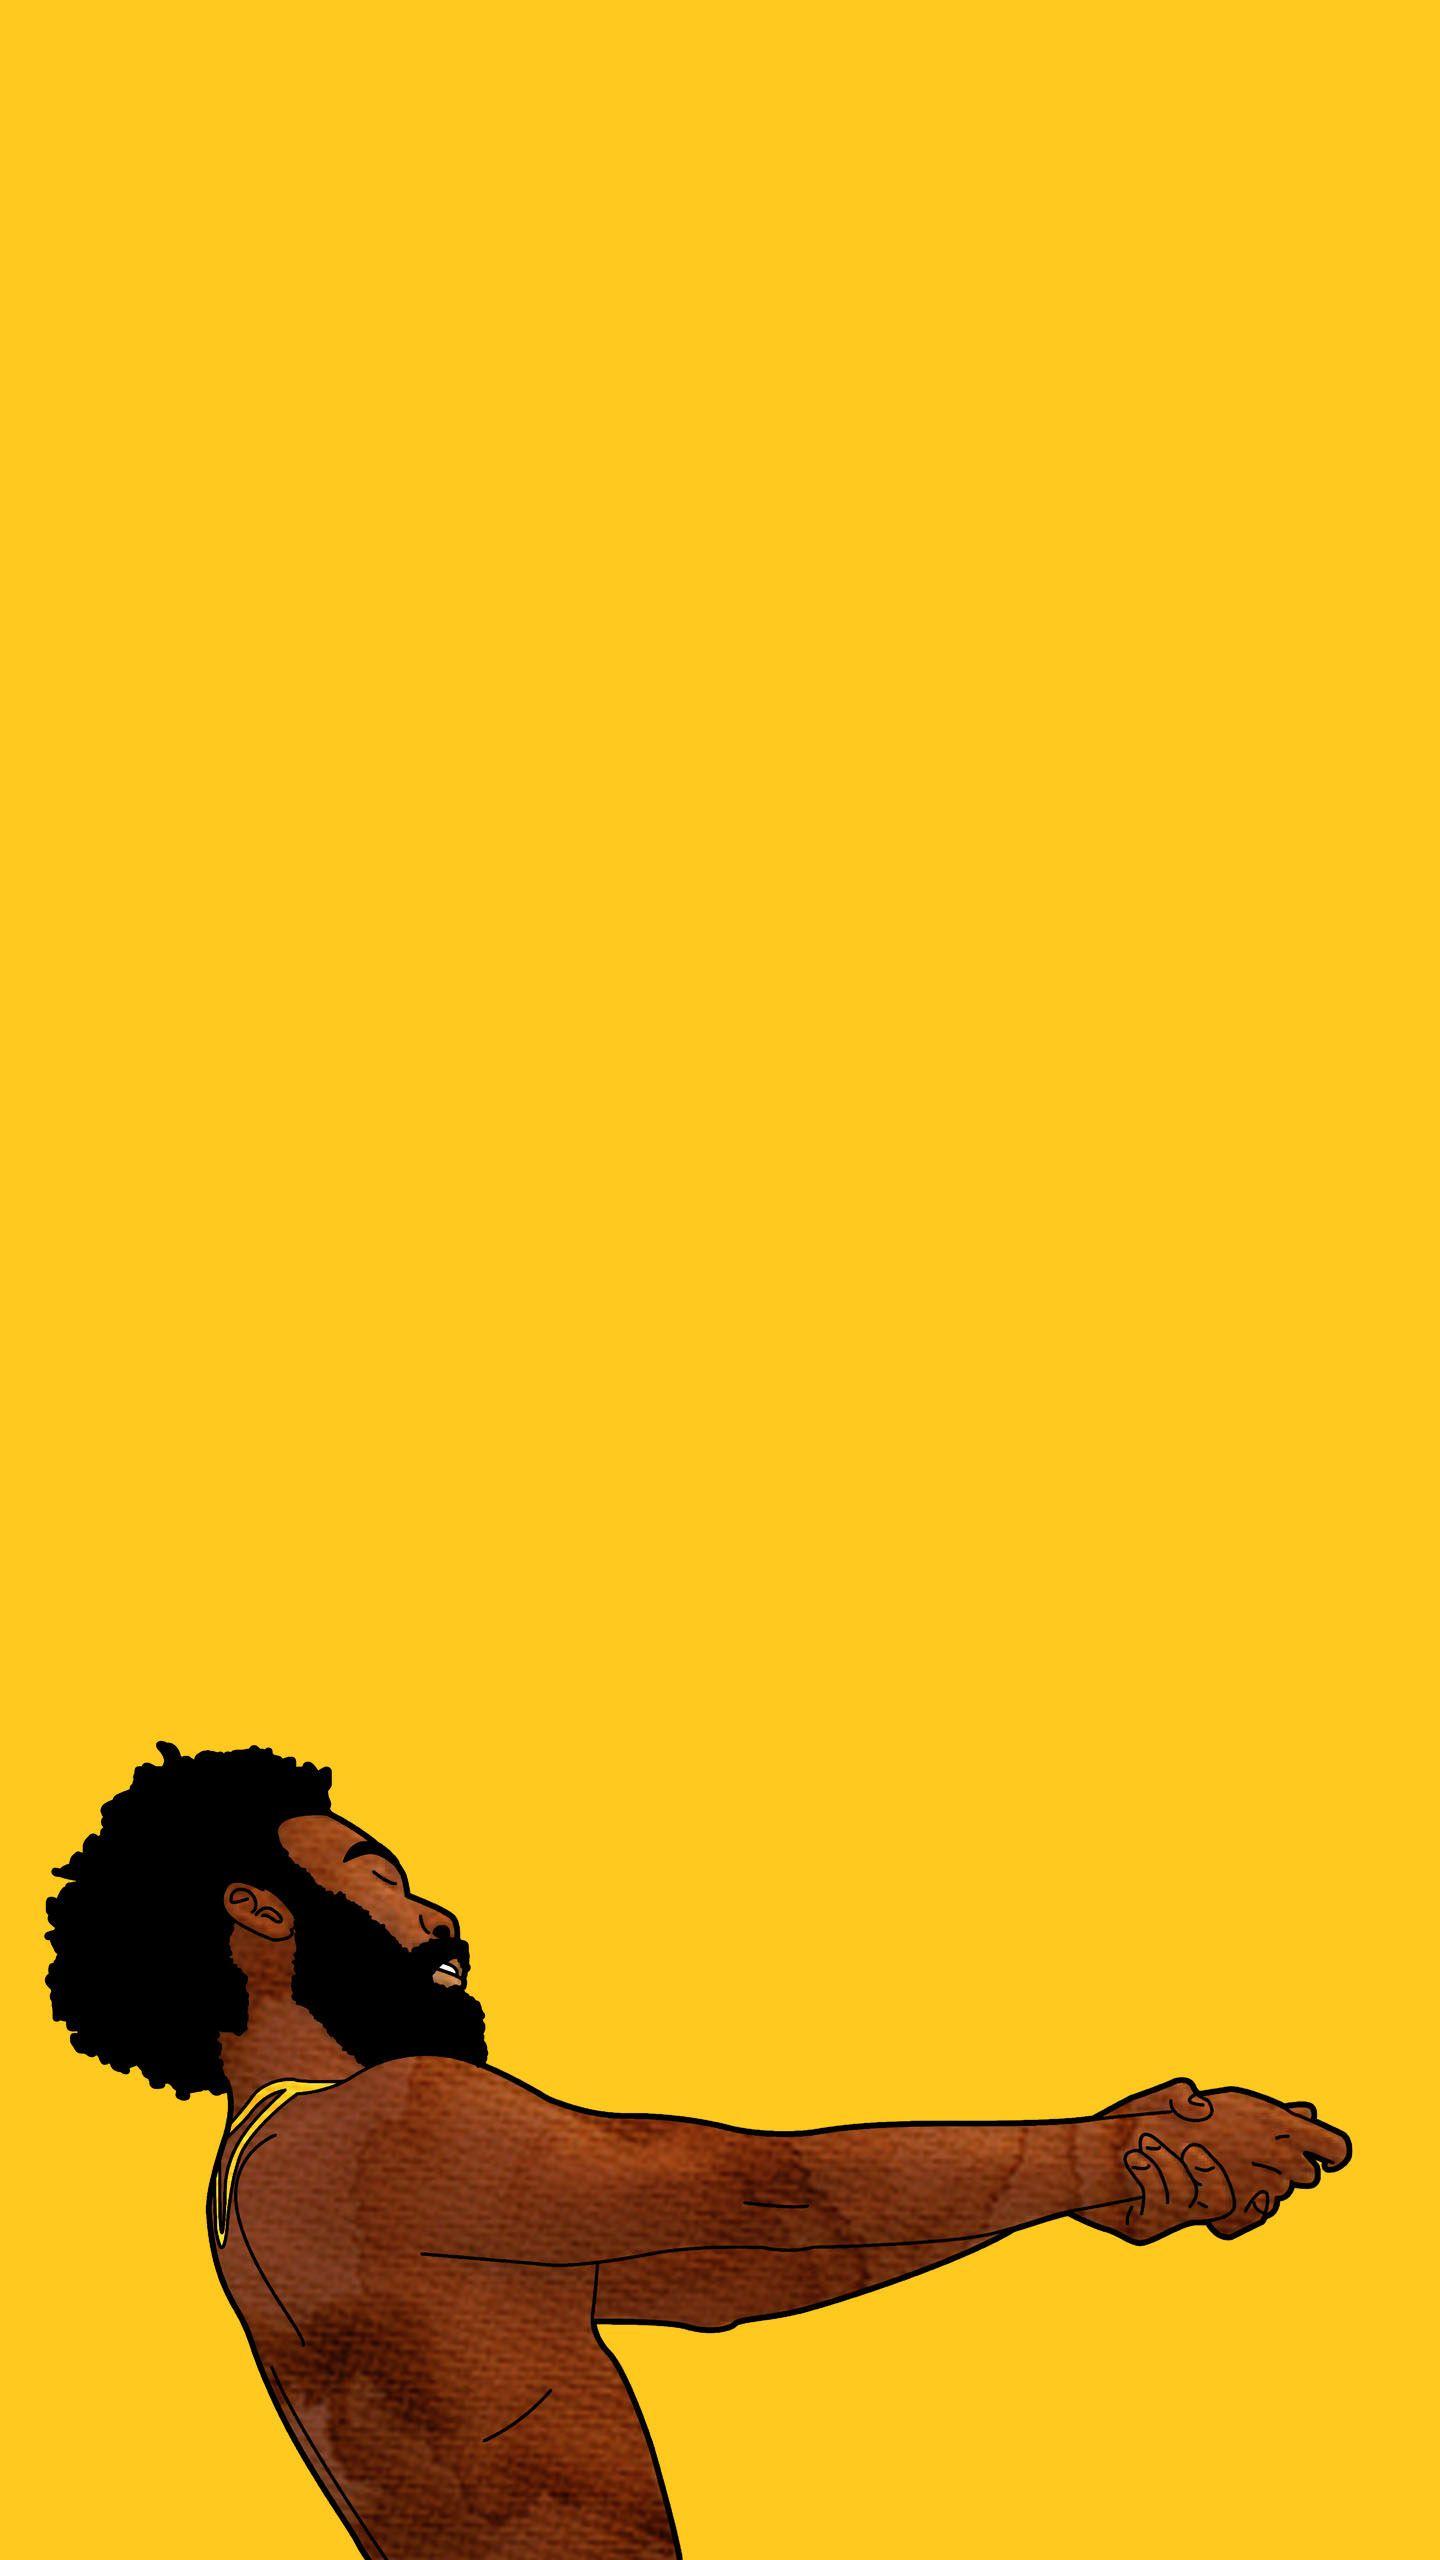 This is America. papel de parede. Hypebeast wallpaper, iPhone